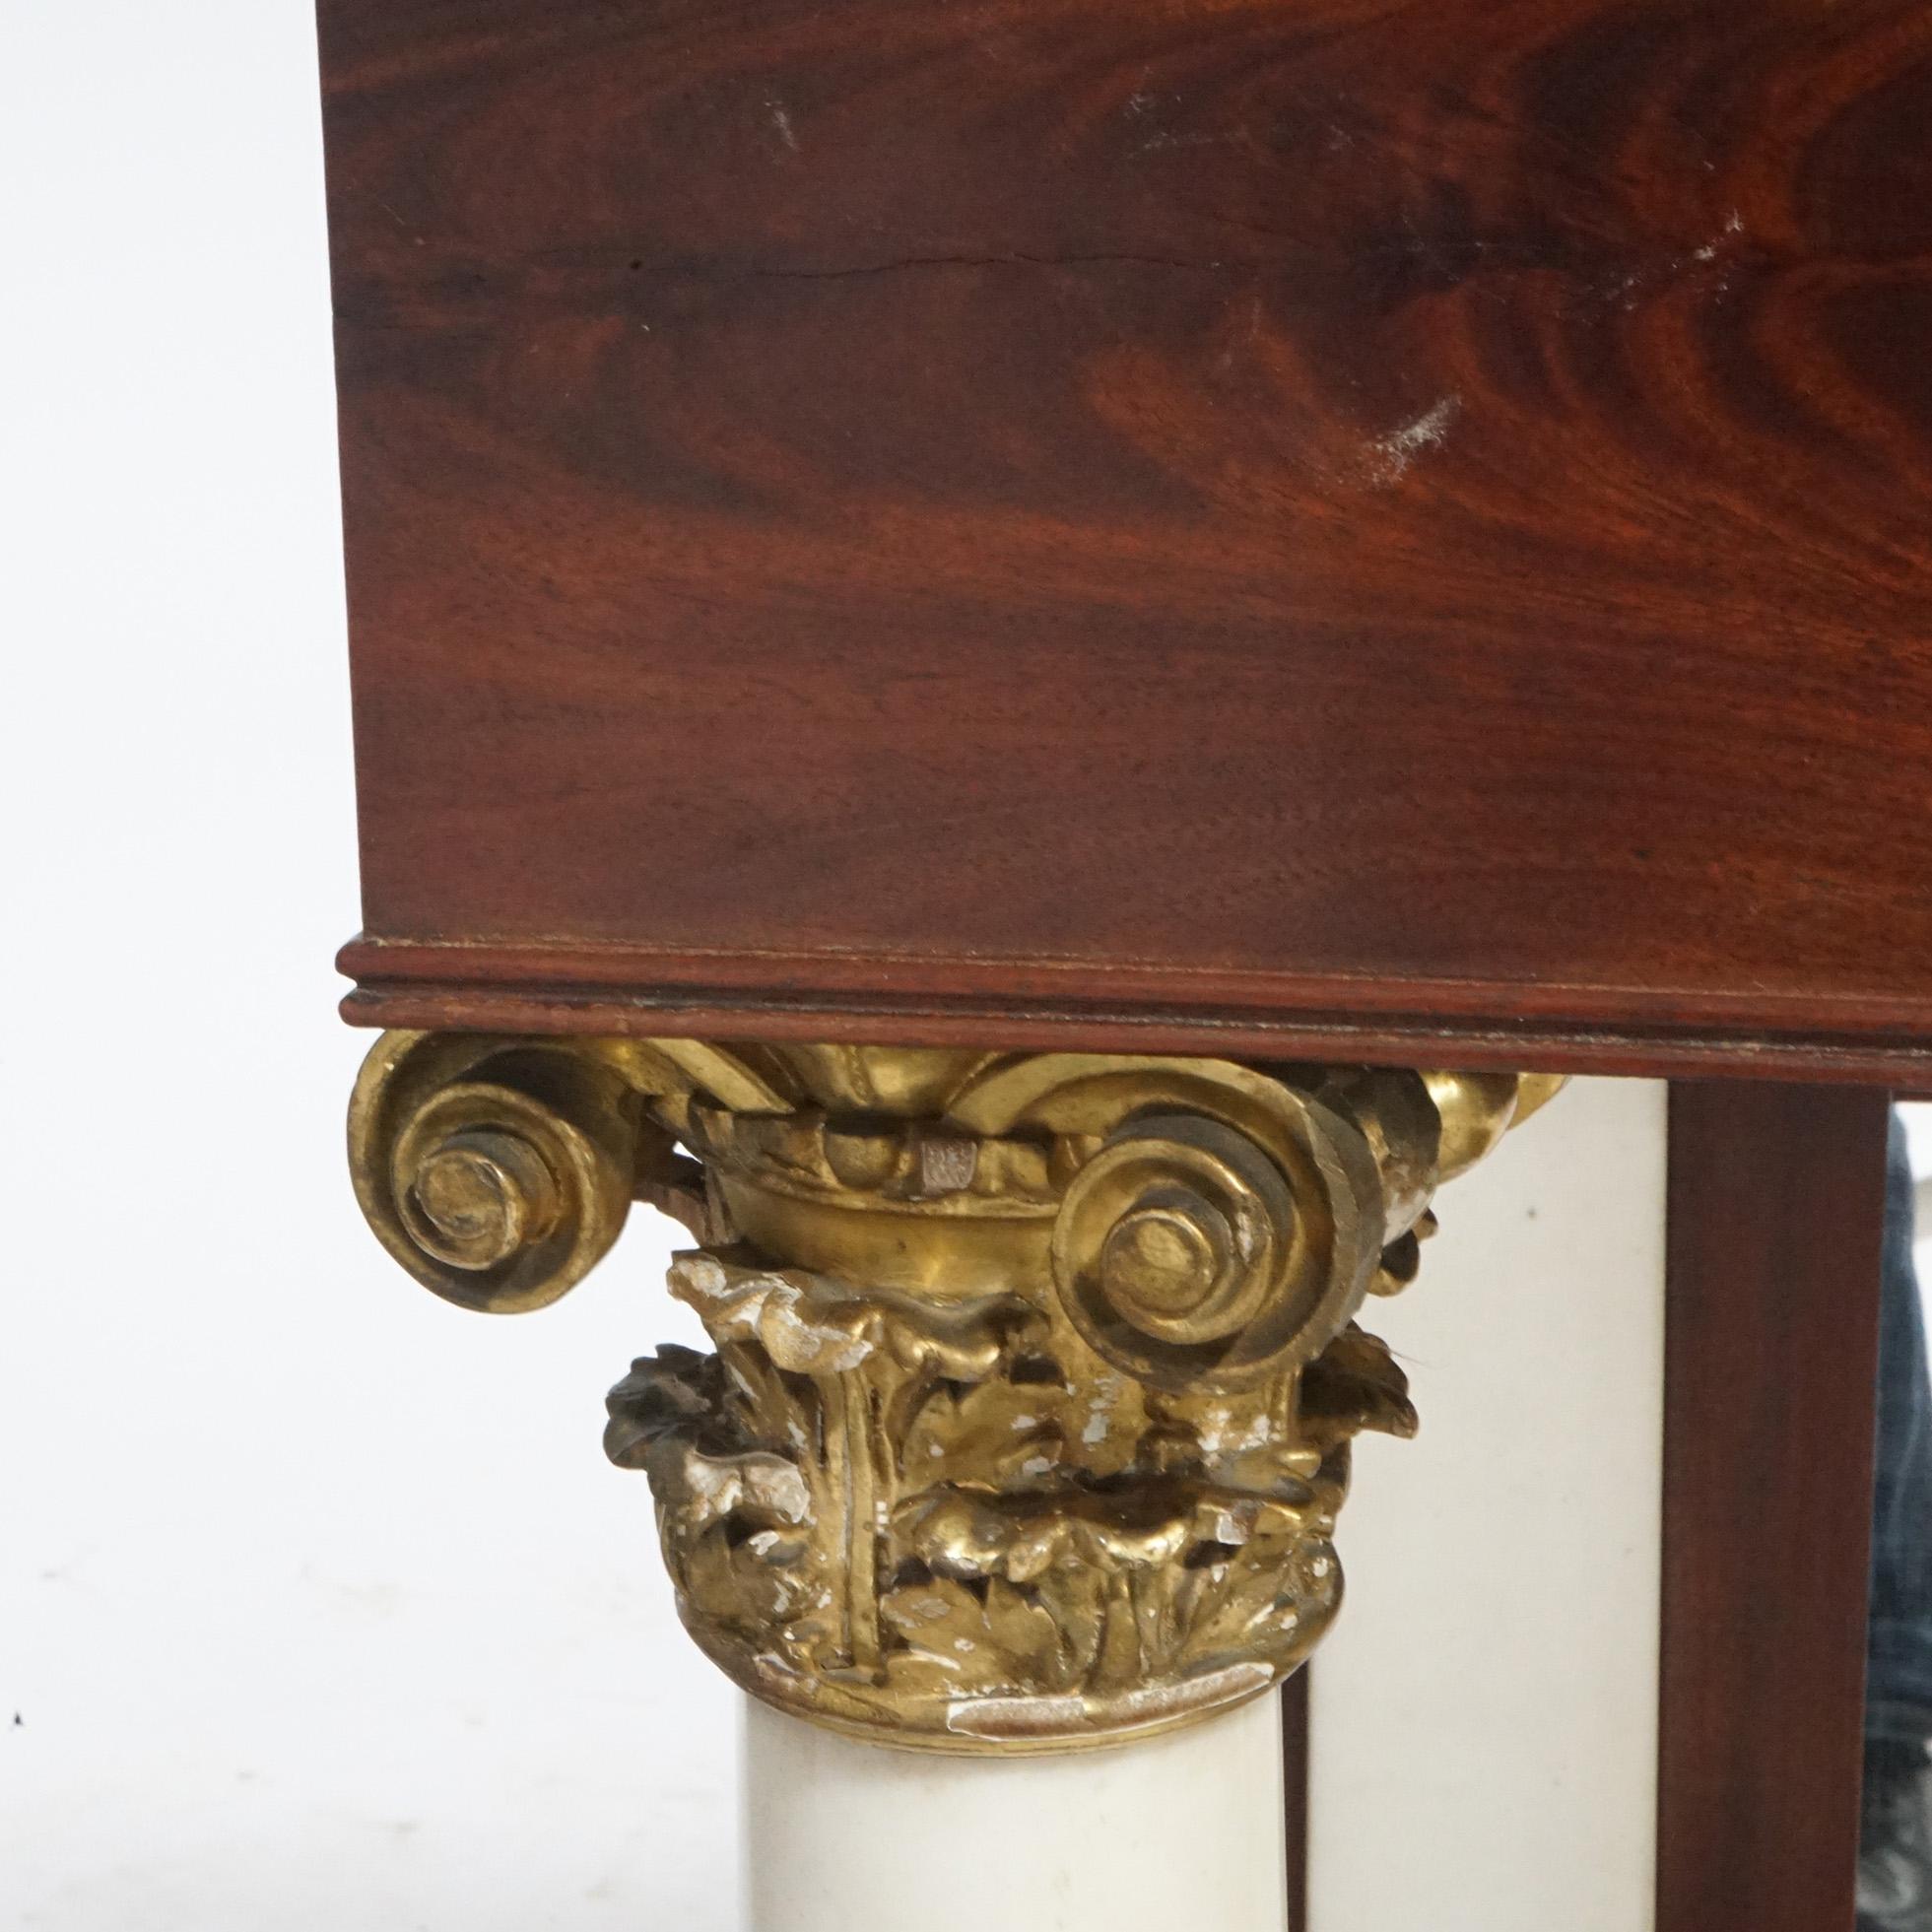 Antique Greco American Empire Flame Mahogany, Marble & Gilt Pier Table, C1830 11